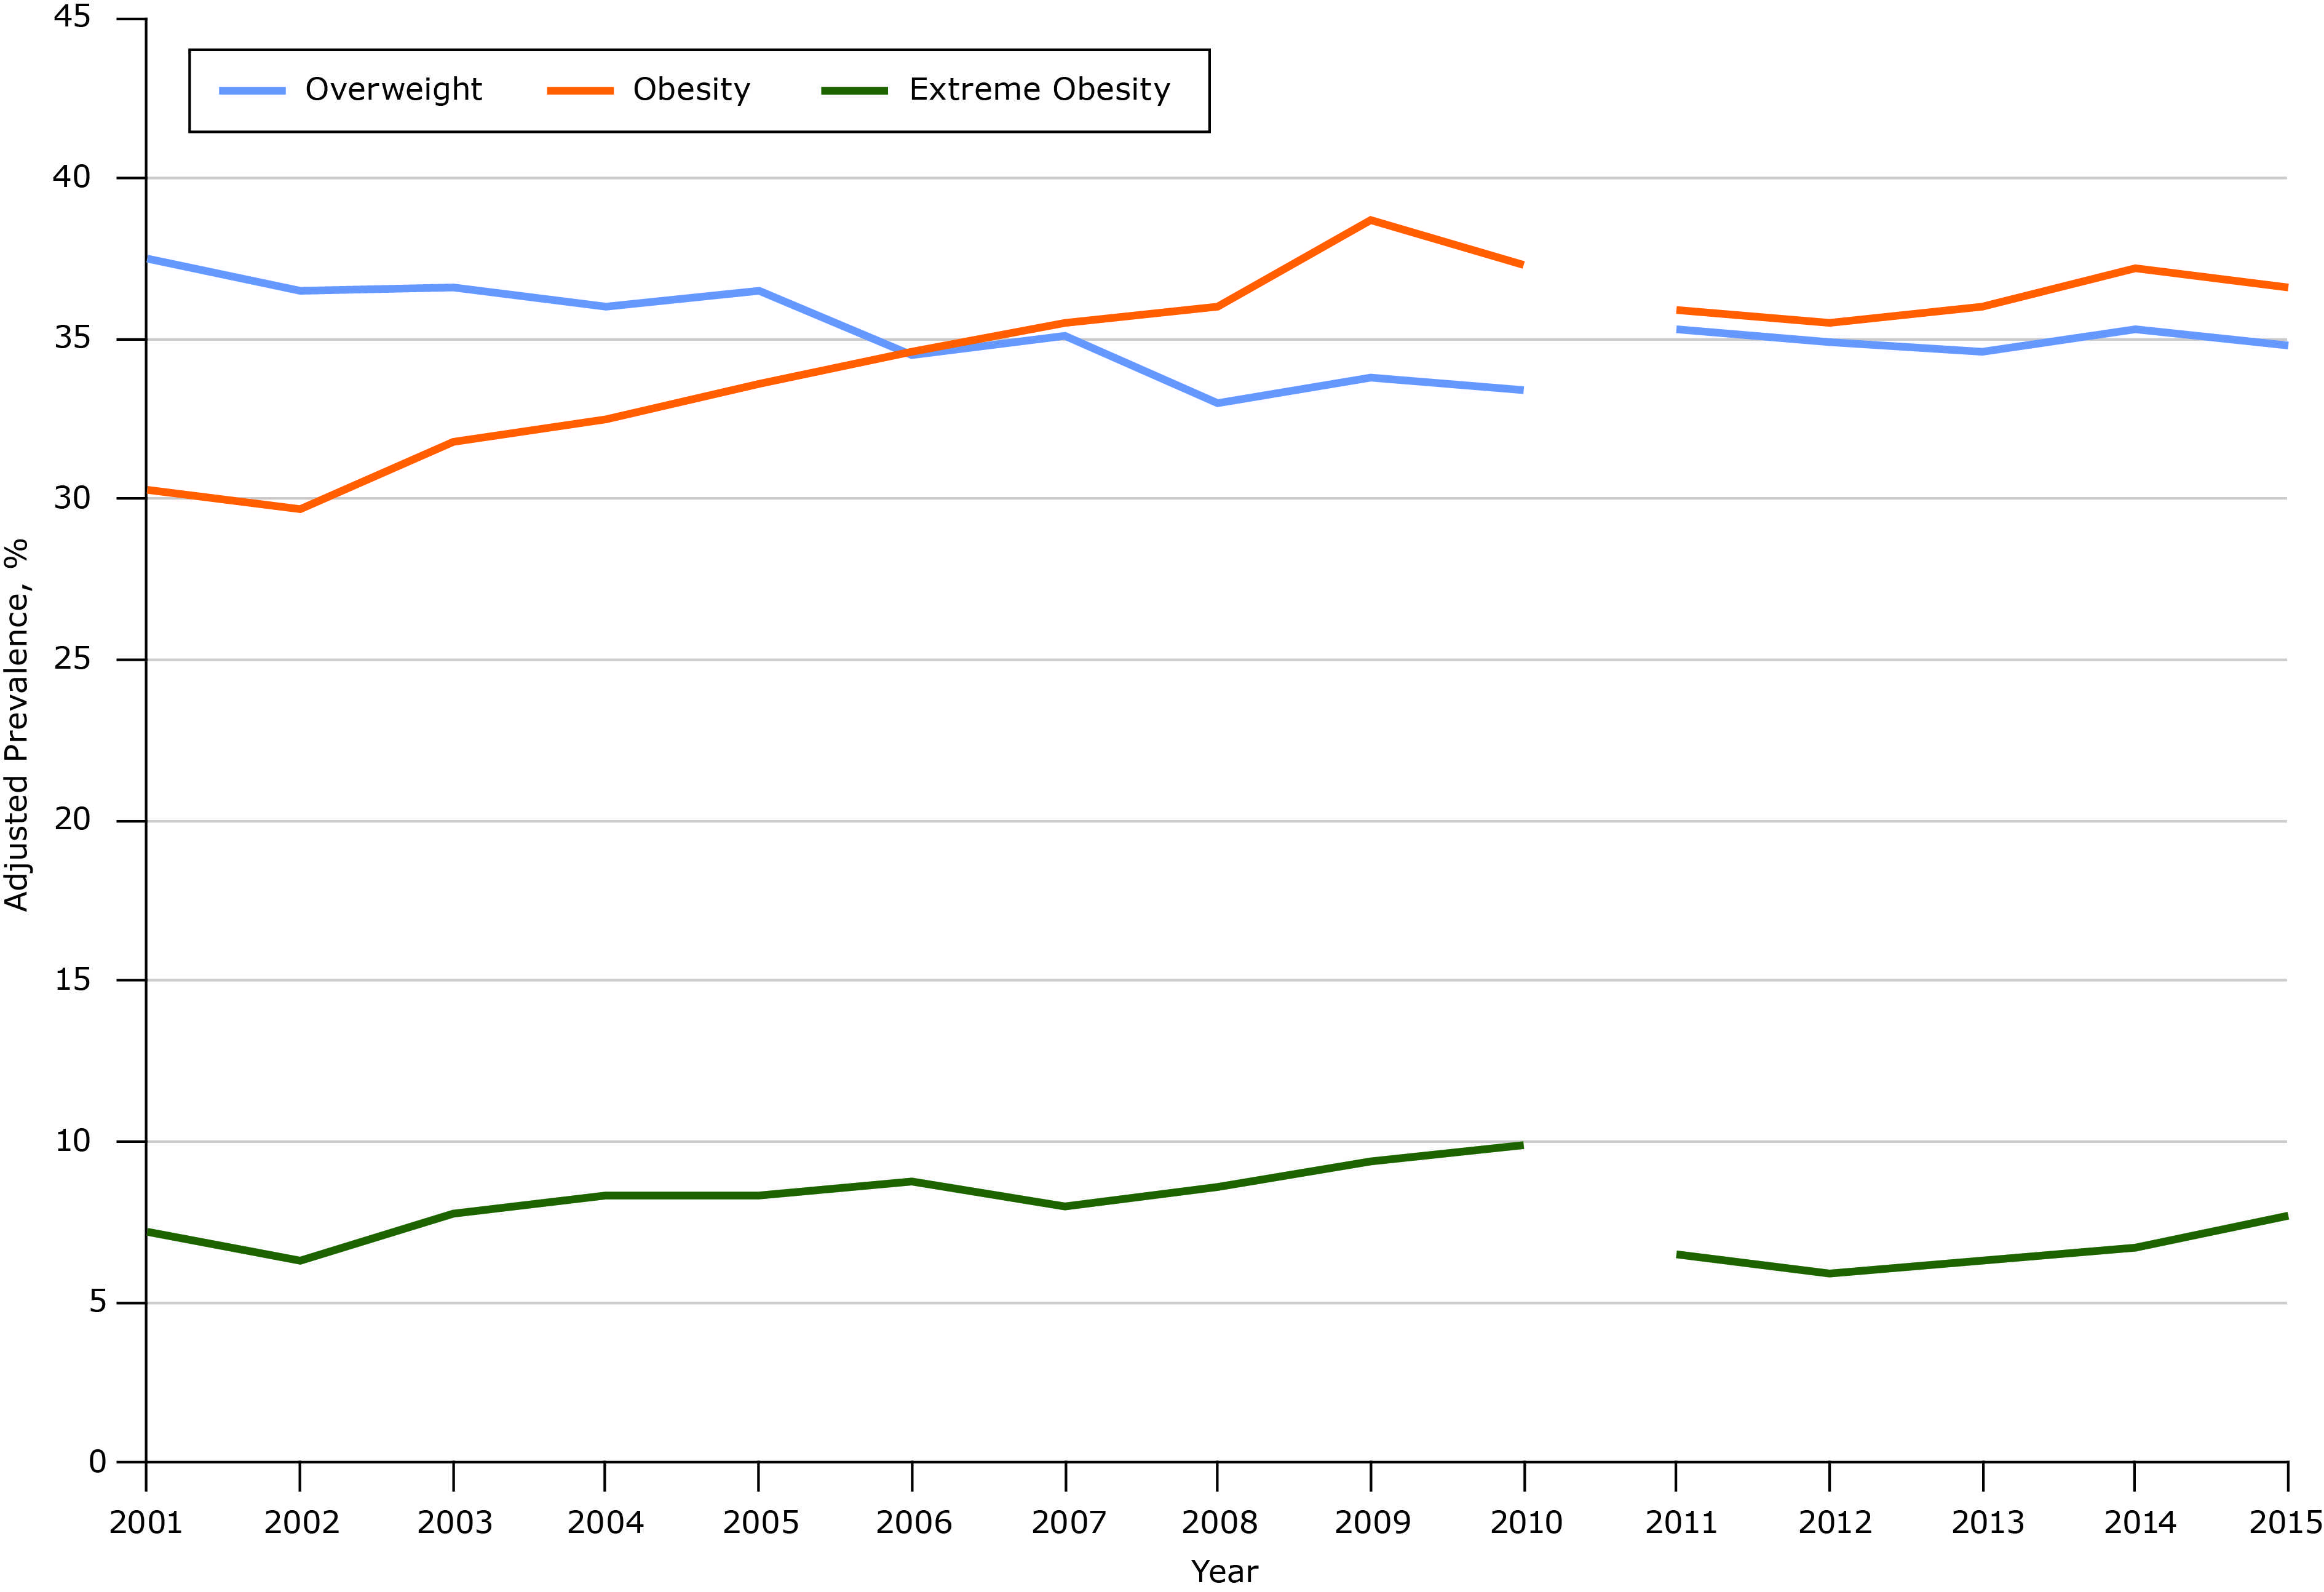 Overall trends in overweight, obesity, and extreme obesity prevalence among Mississippi adults, Behavioral Risk Factor Surveillance System, 2001–2010 and 2011–2015. Beginning in 2011, BRFSS data included landline and cellular telephone panels, and a new weighting method was implemented to improve accuracy (11). Survey analysts recommend not tracking trends across 2011 because of these changes.